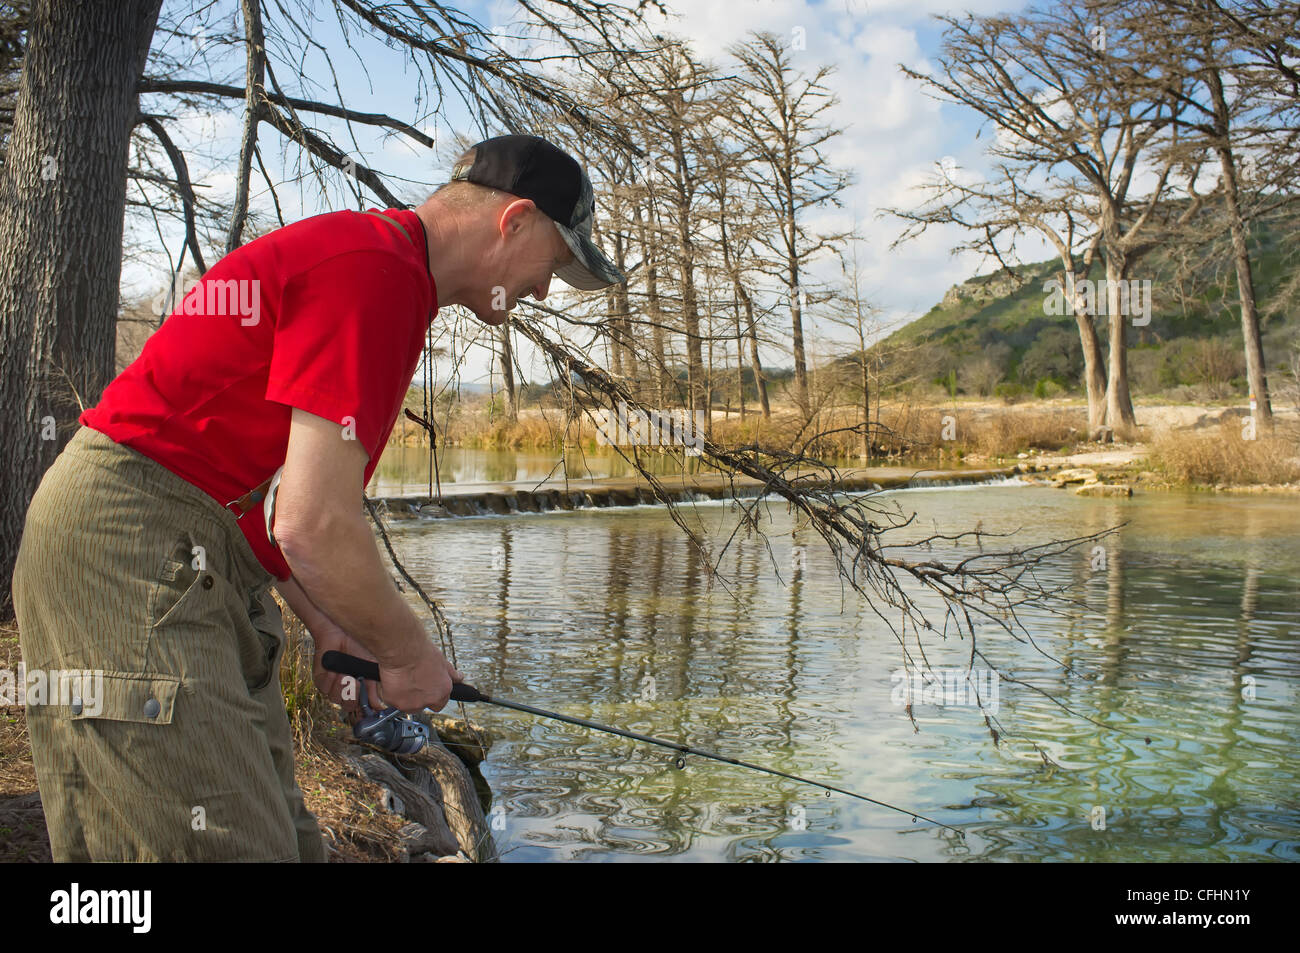 Angler fishing with fishing rod at Frio River in Texas Stock Photo